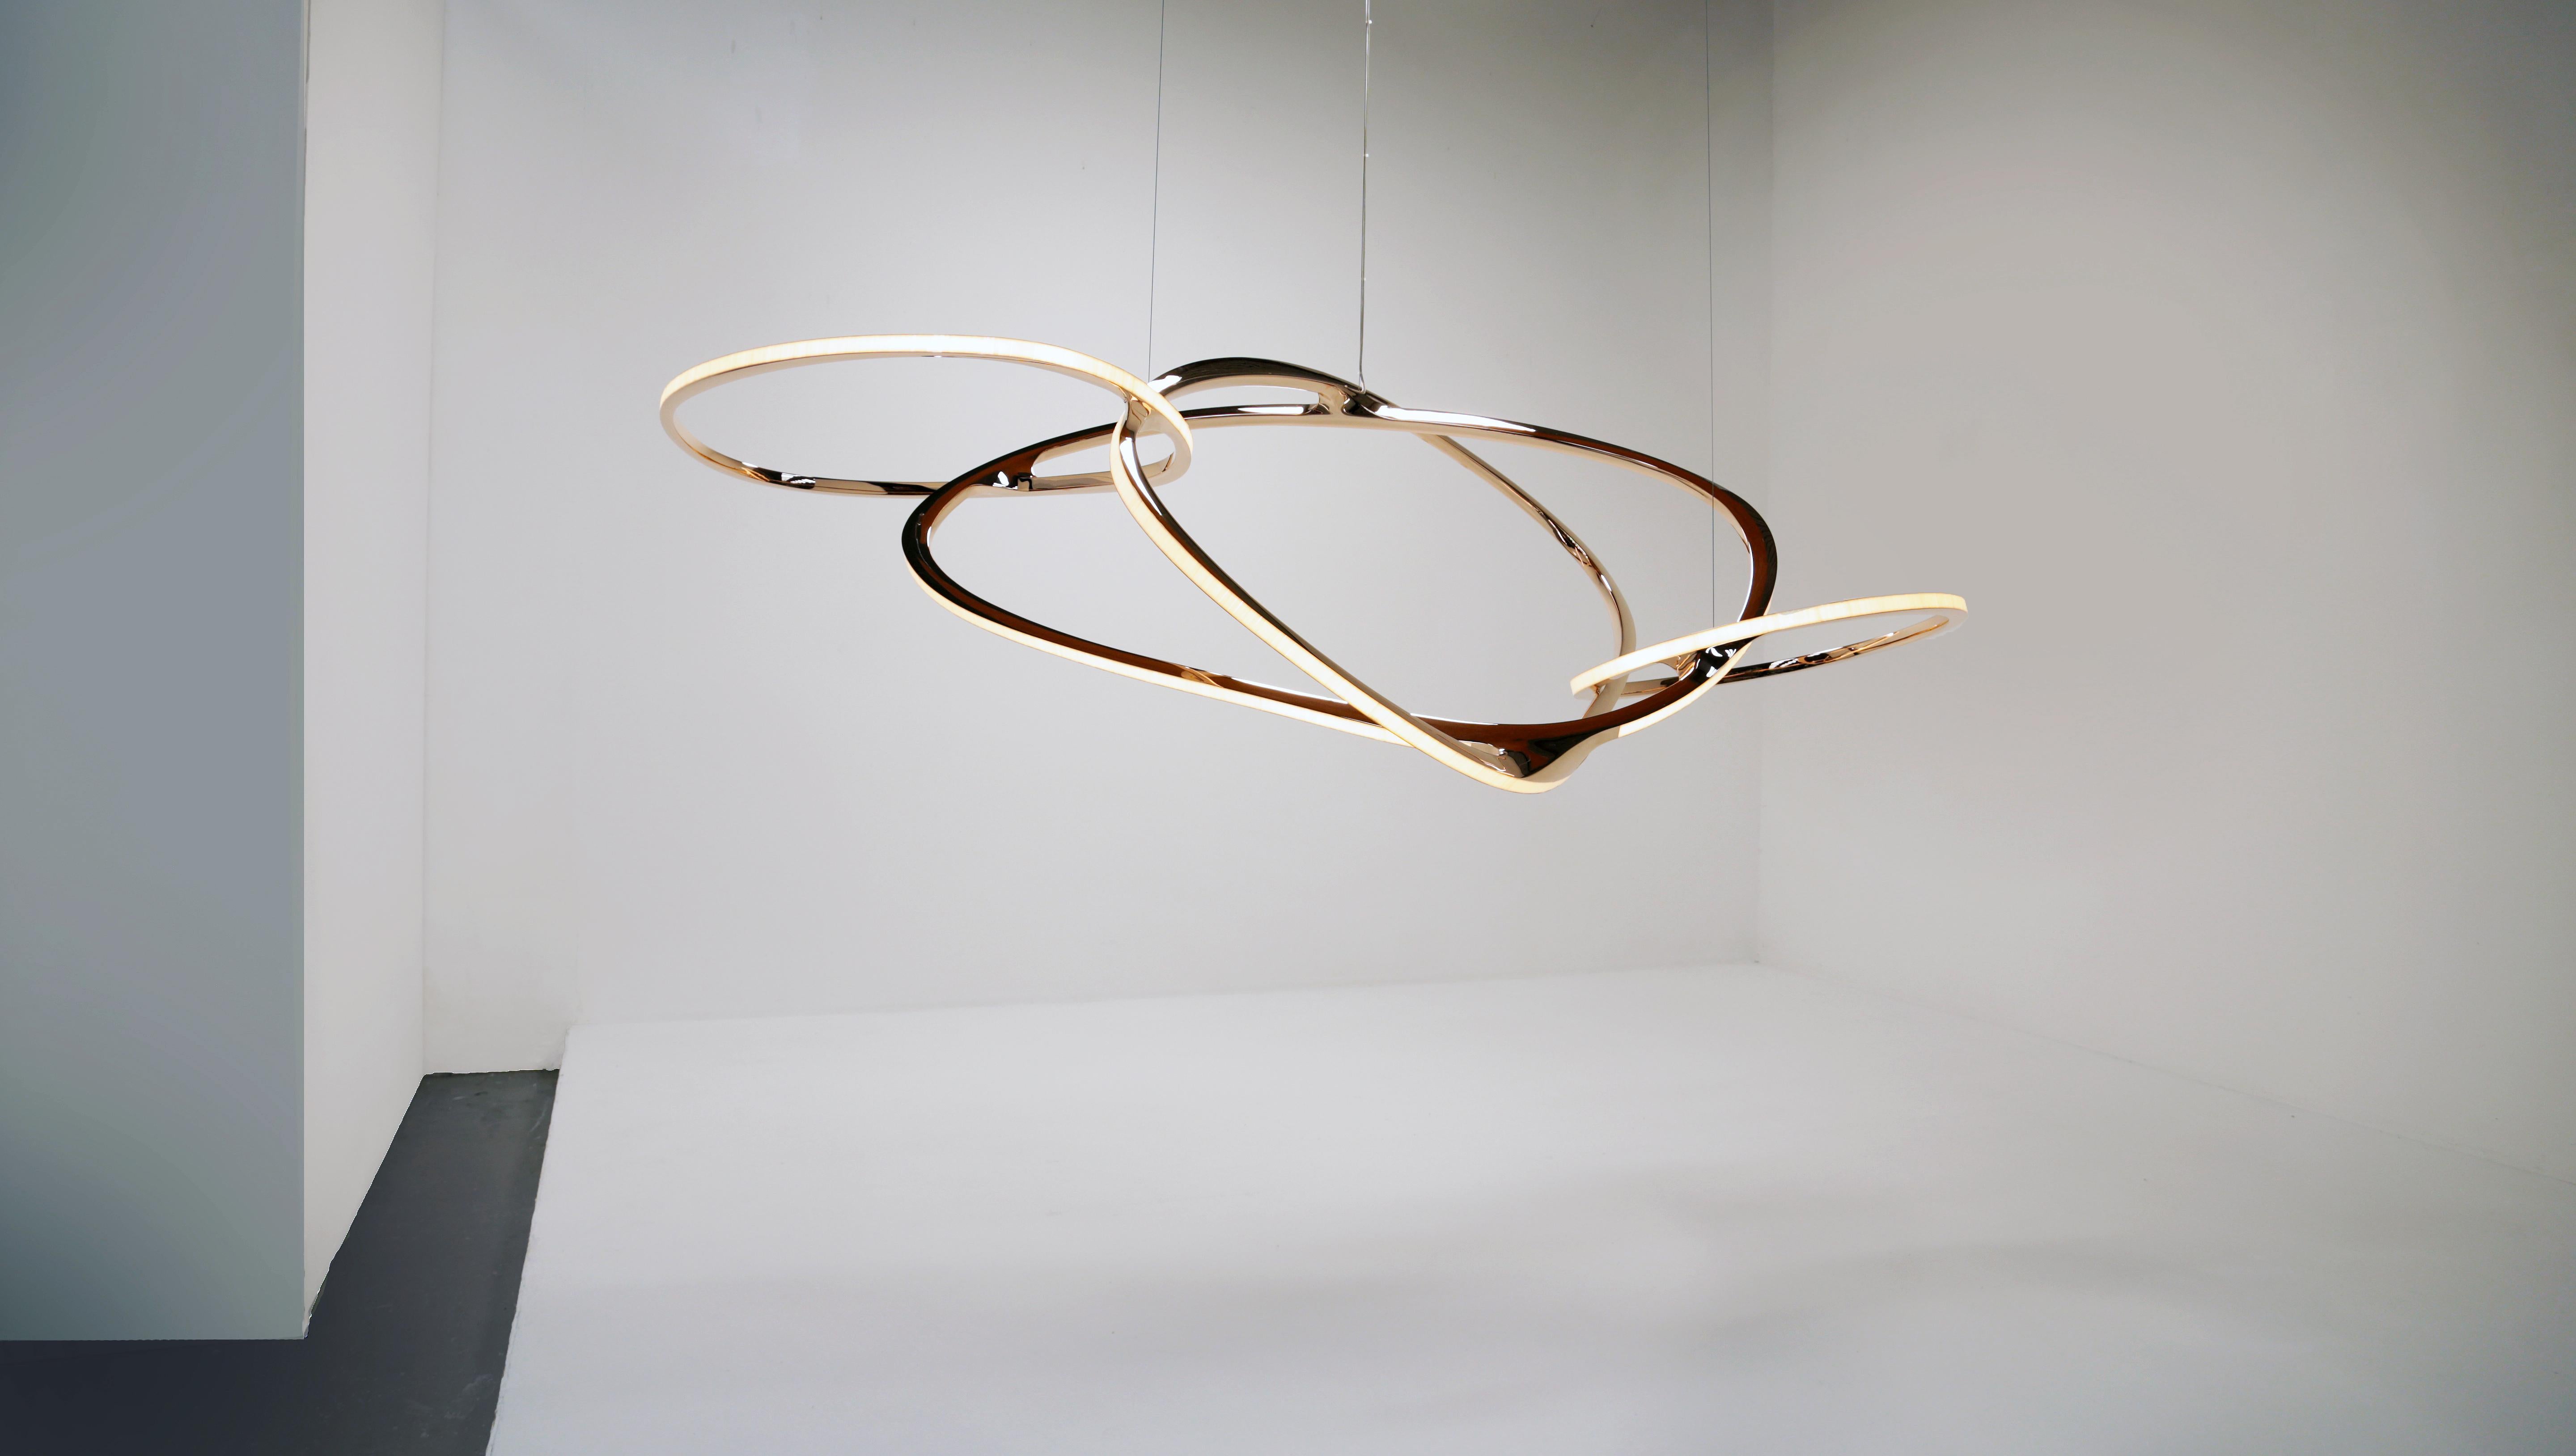 As with the rest of Naimh Barry's work, on it Goes II is inspired by forms and movements in the natural world that evoke emotion. With every element of this new piece, its natural lines, counterbalance of polished metal and light, and arrangement of